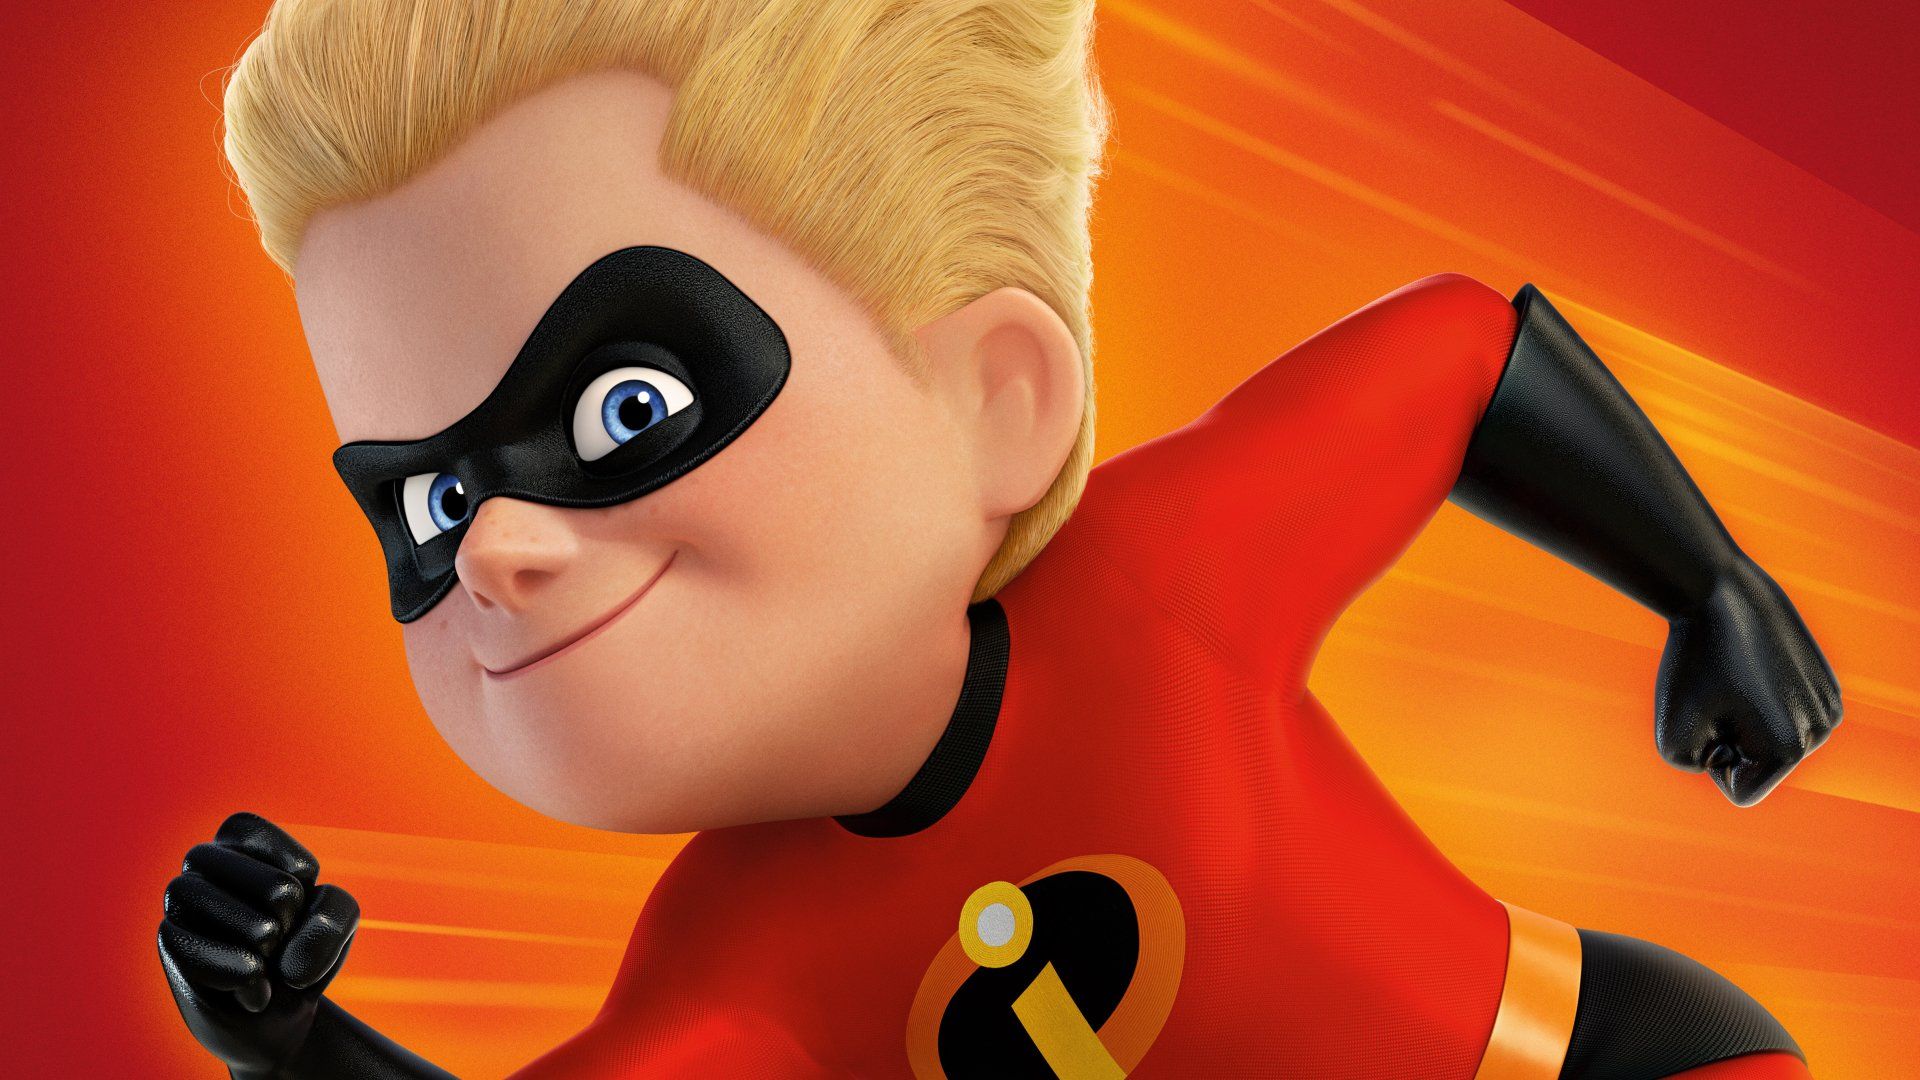 Dash From The Incredibles 2 Wallpapers